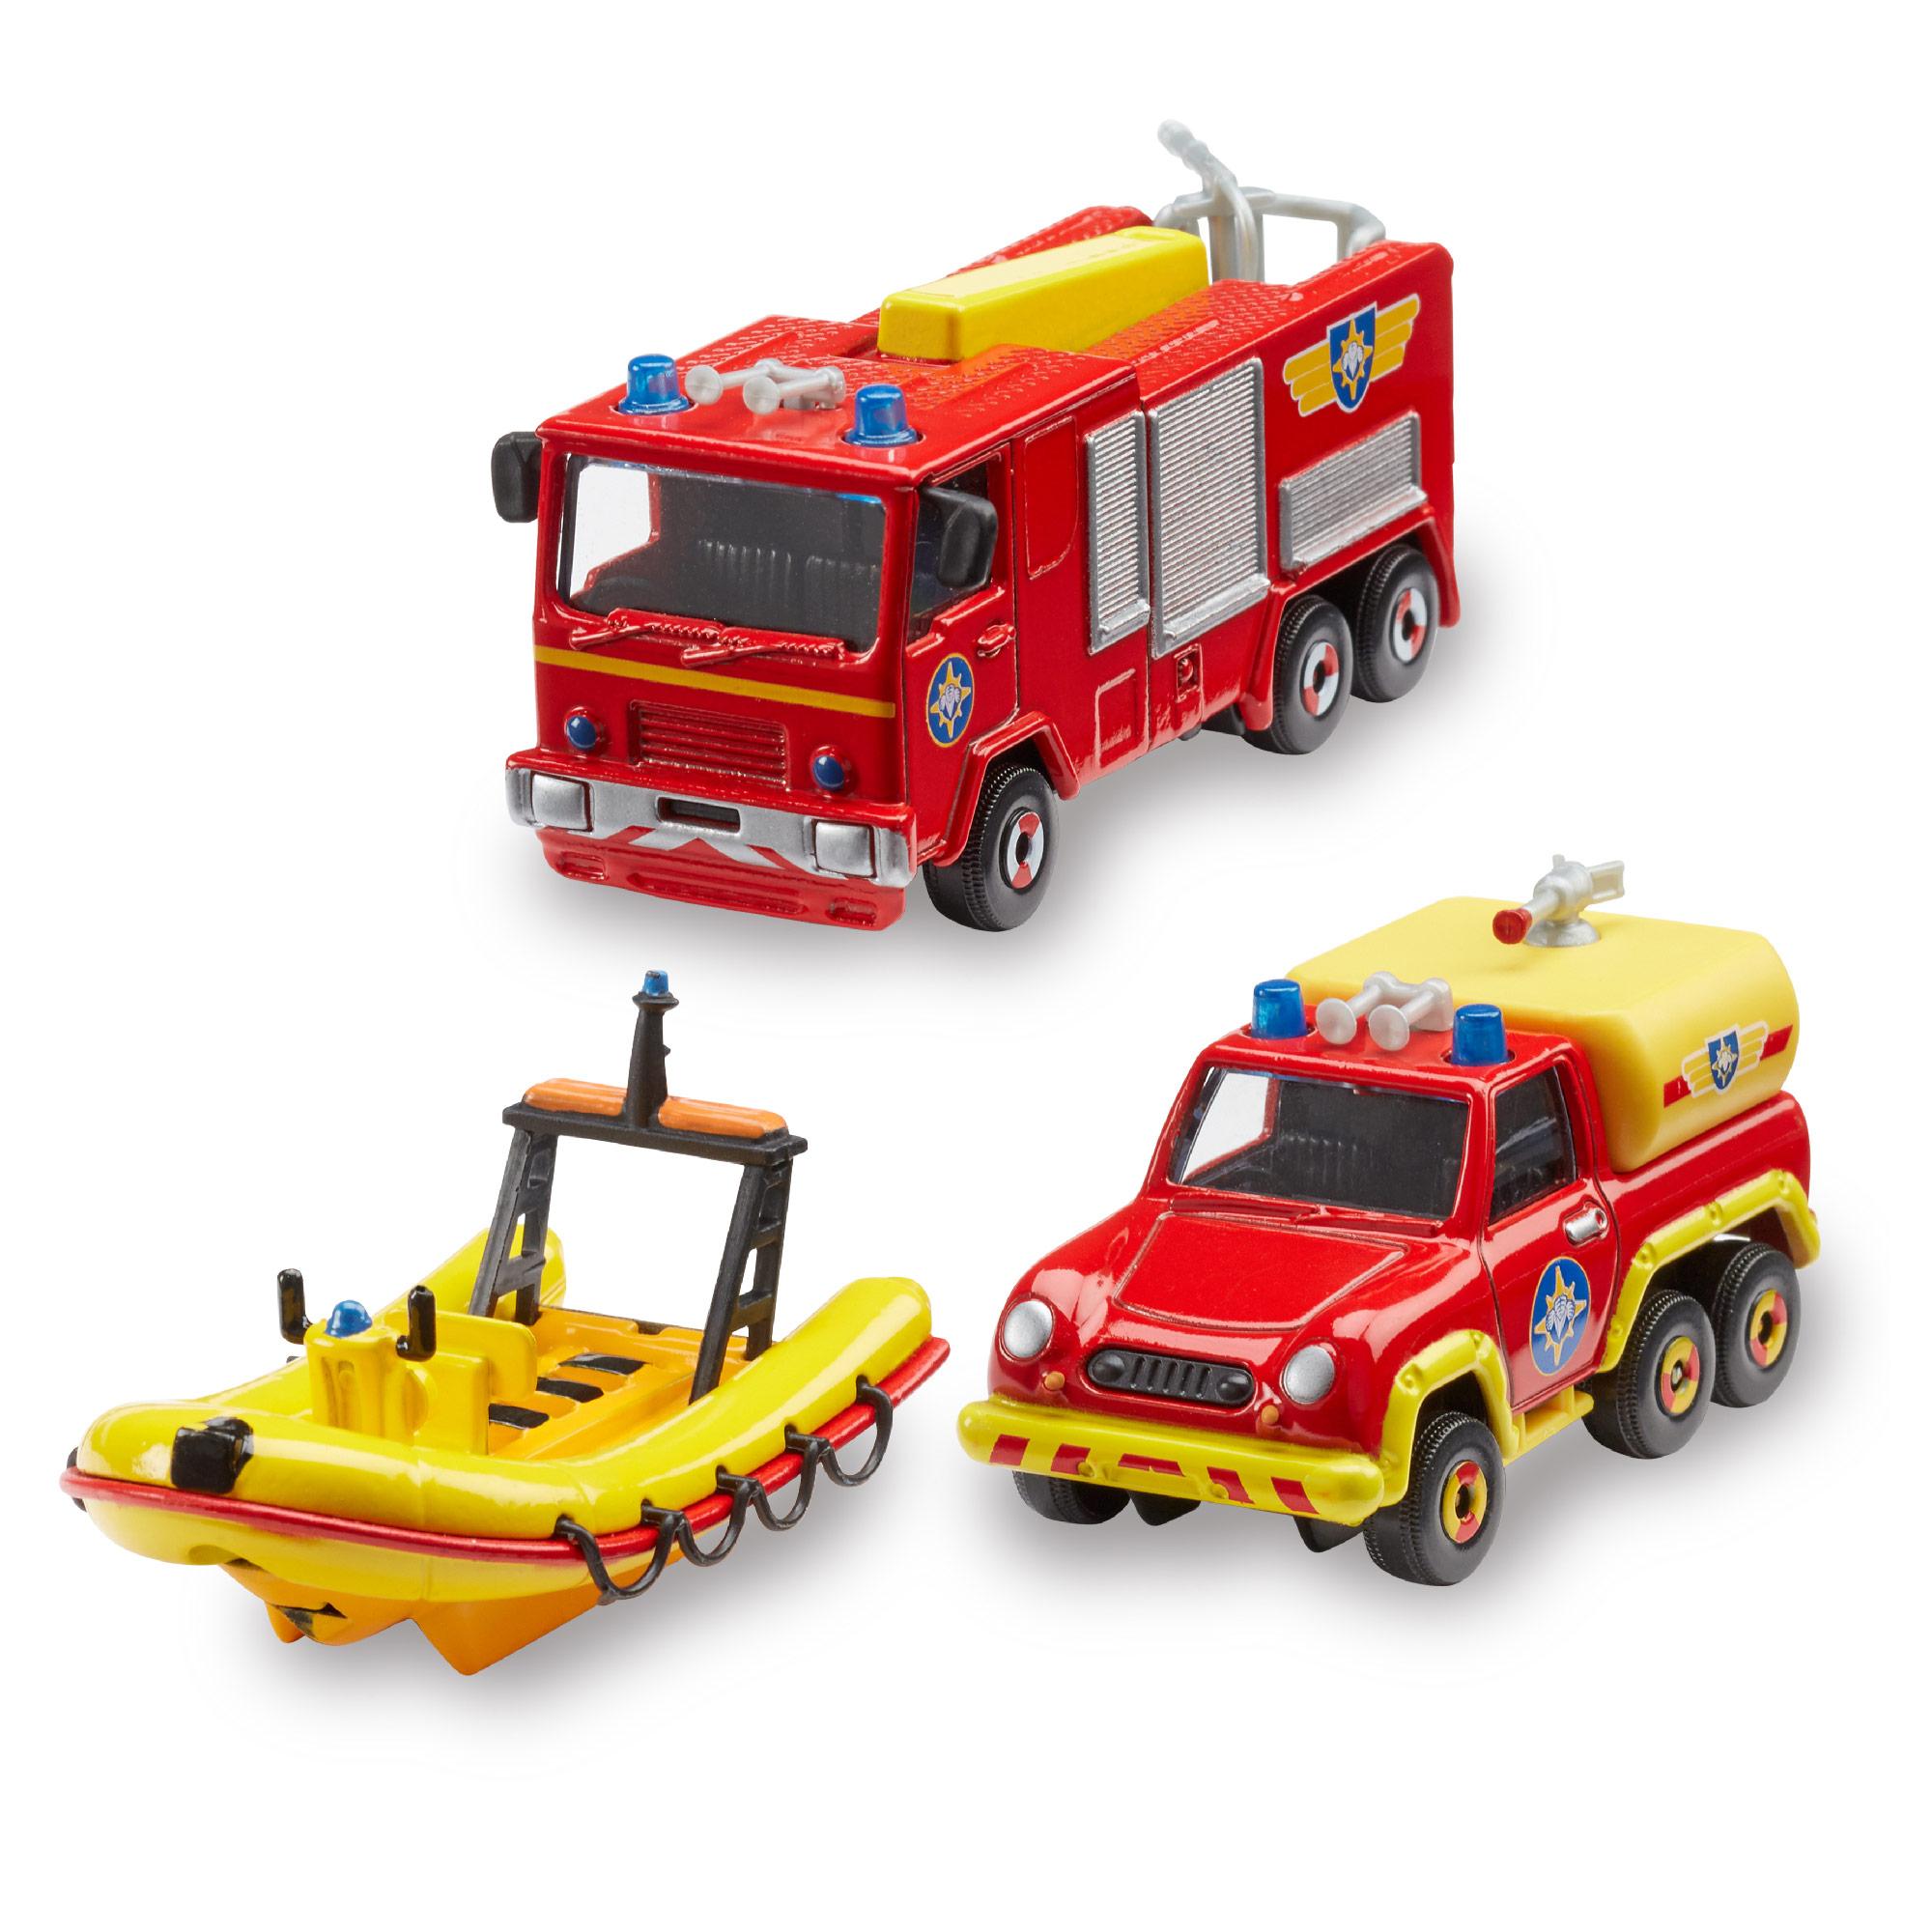 Fireman Sam Diecast 3-Pack - £15.00 - Hamleys for Toys and Games